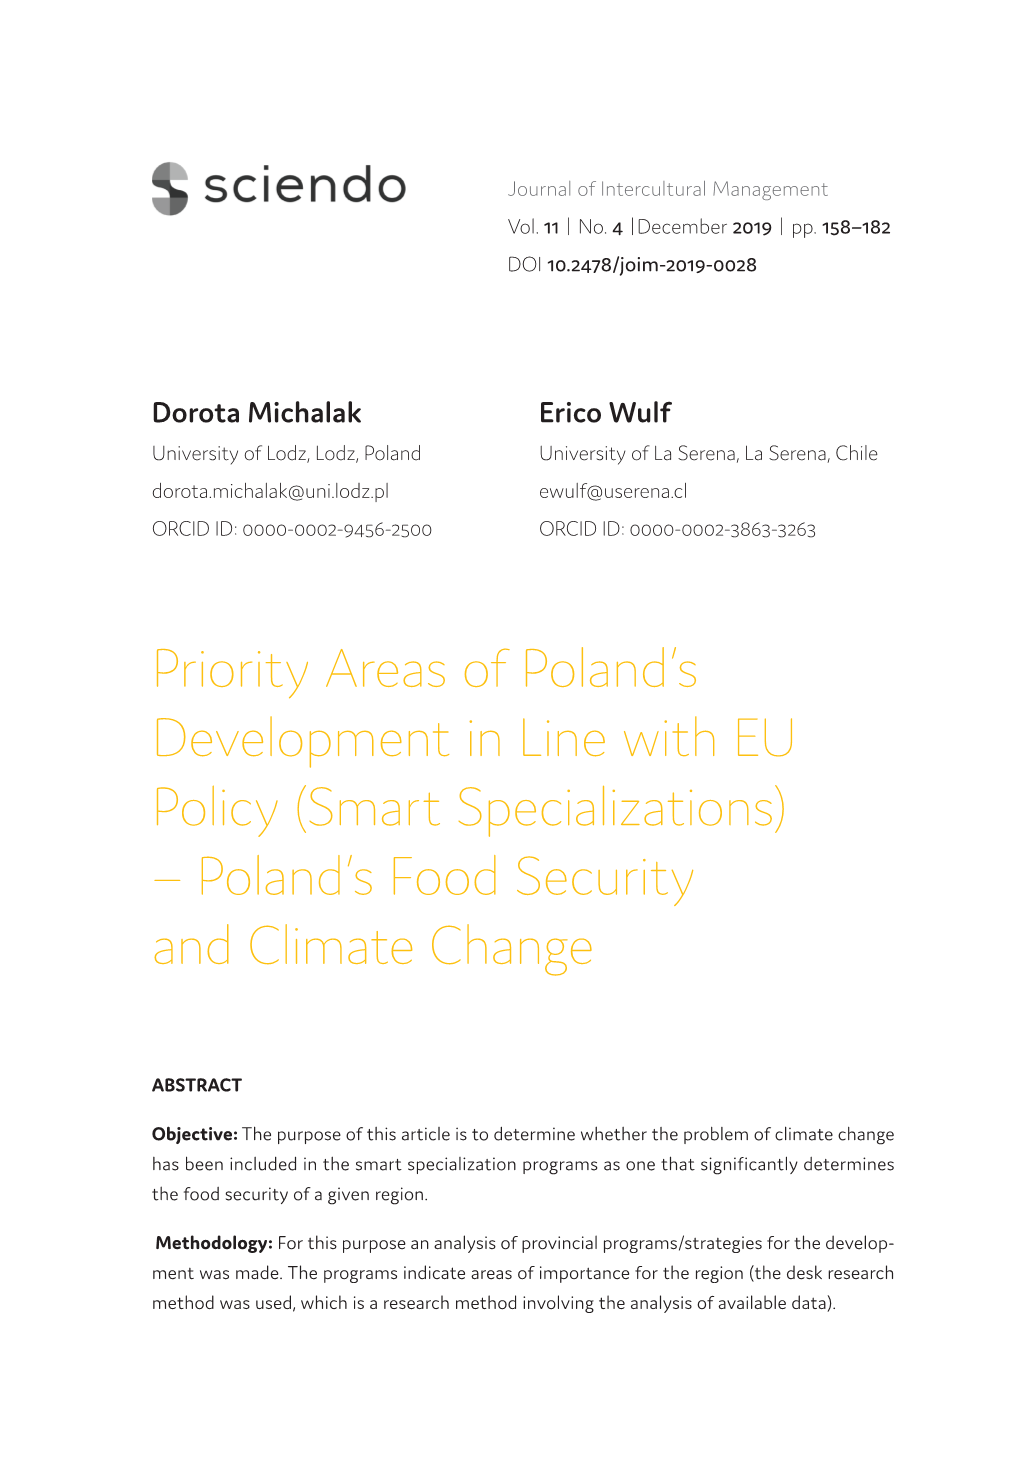 Priority Areas of Poland's Development in Line with EU Policy